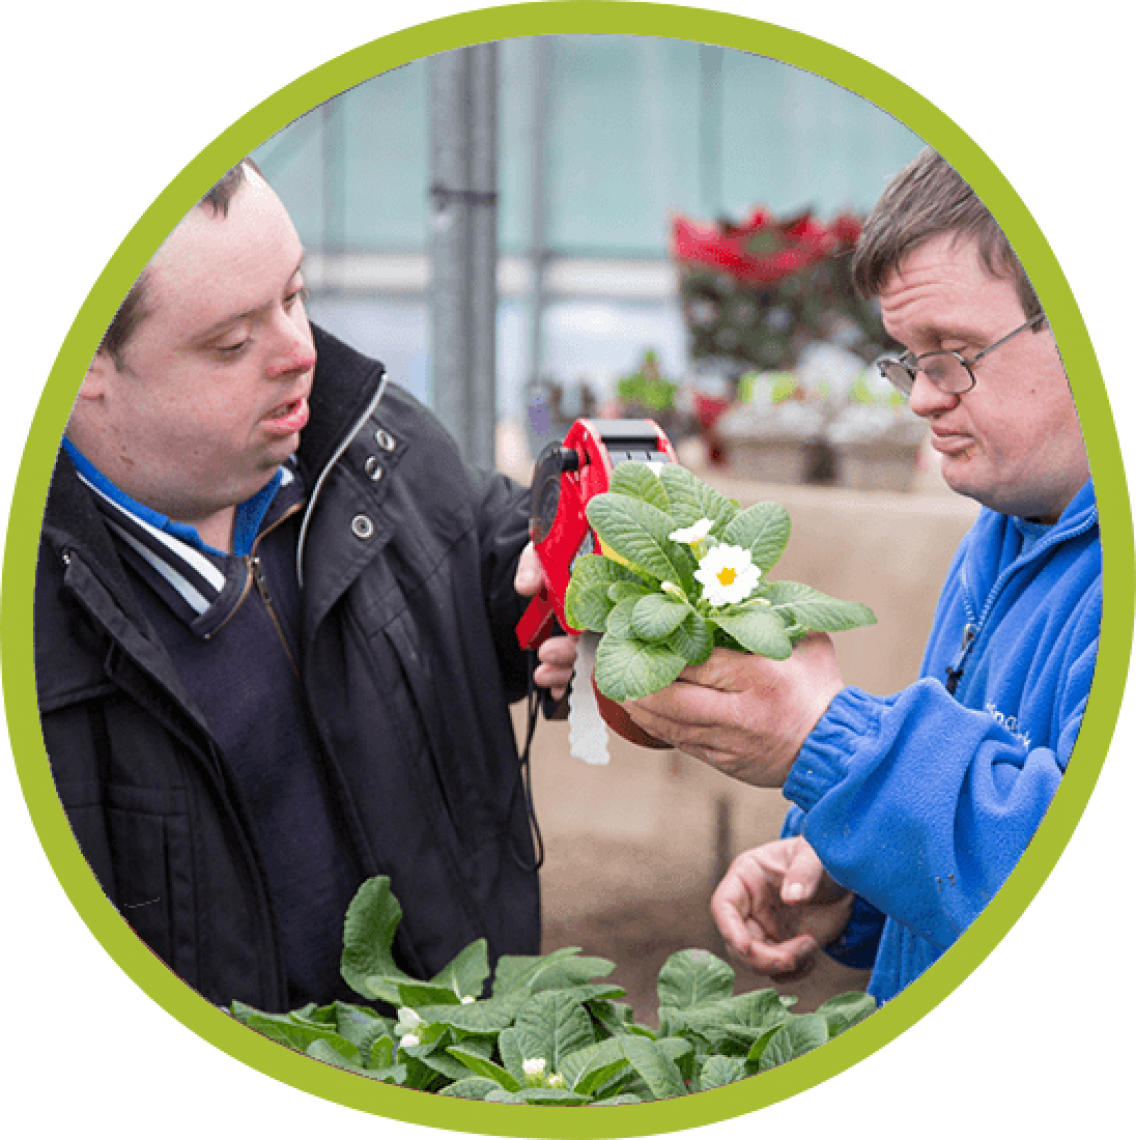 two young men working at a garden centre